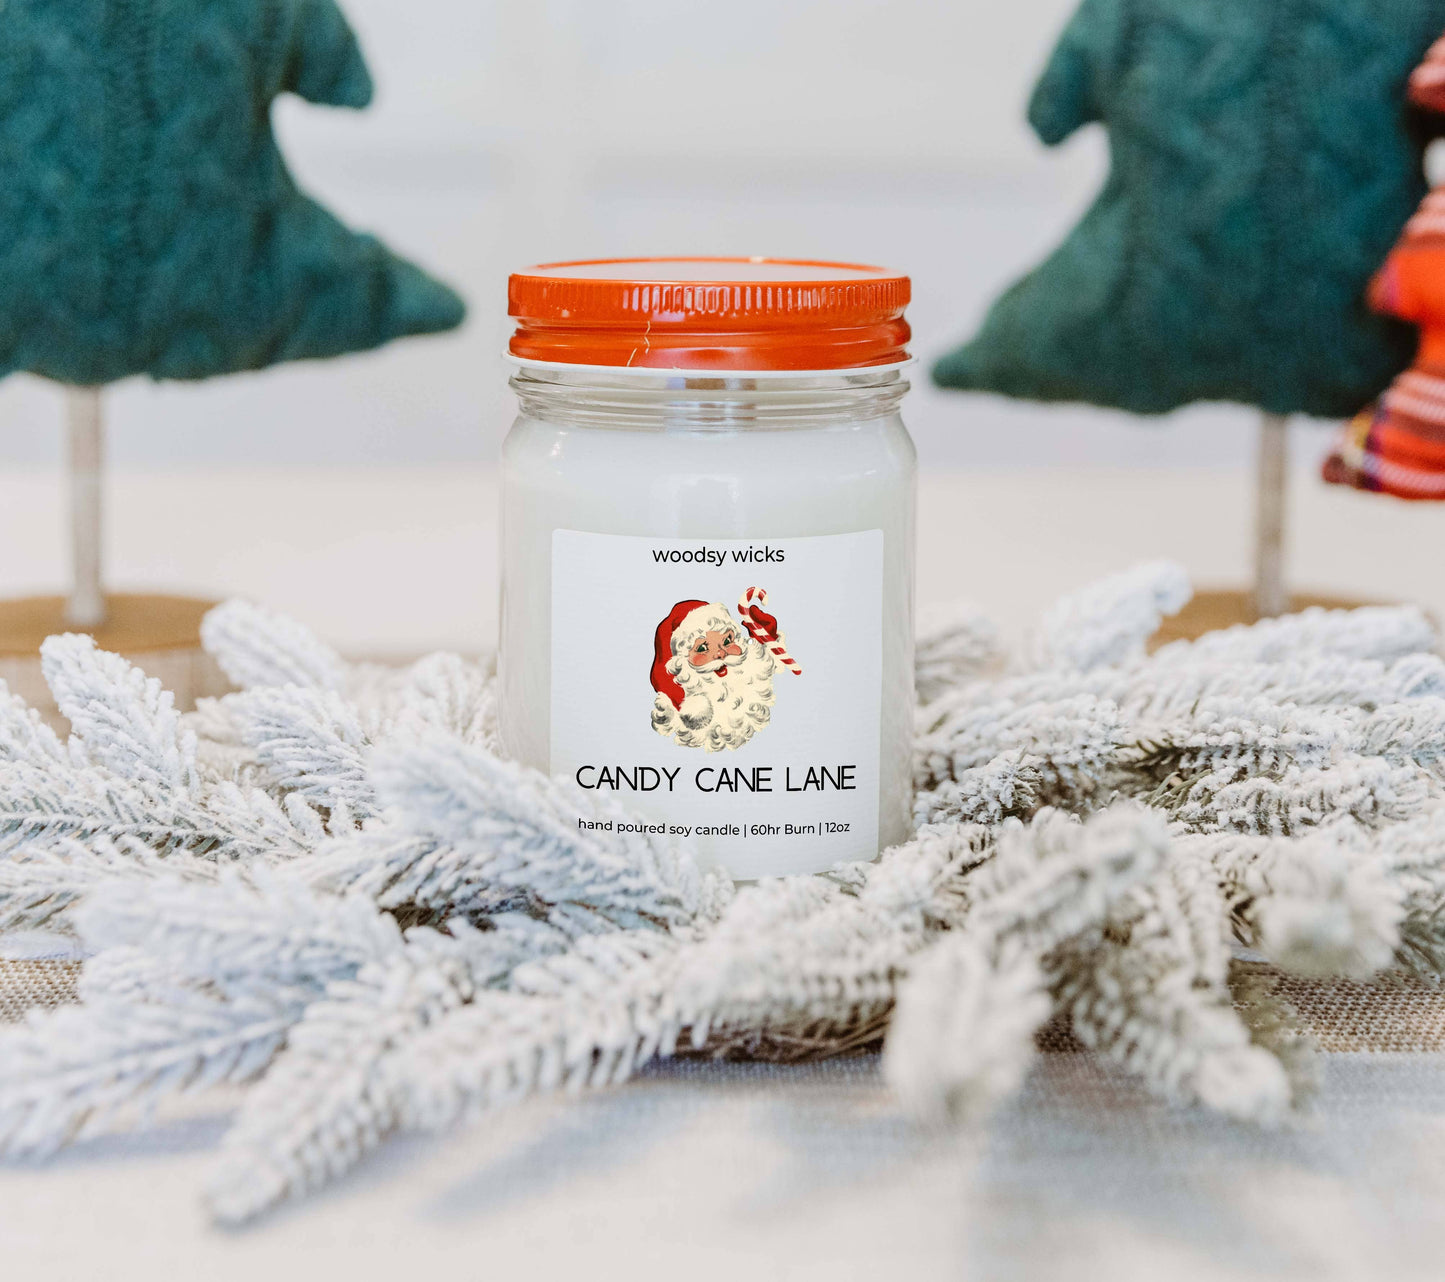 Candy Cane Lane Candle 100% Soy Wax - Wick Options: 8oz / Wood wick